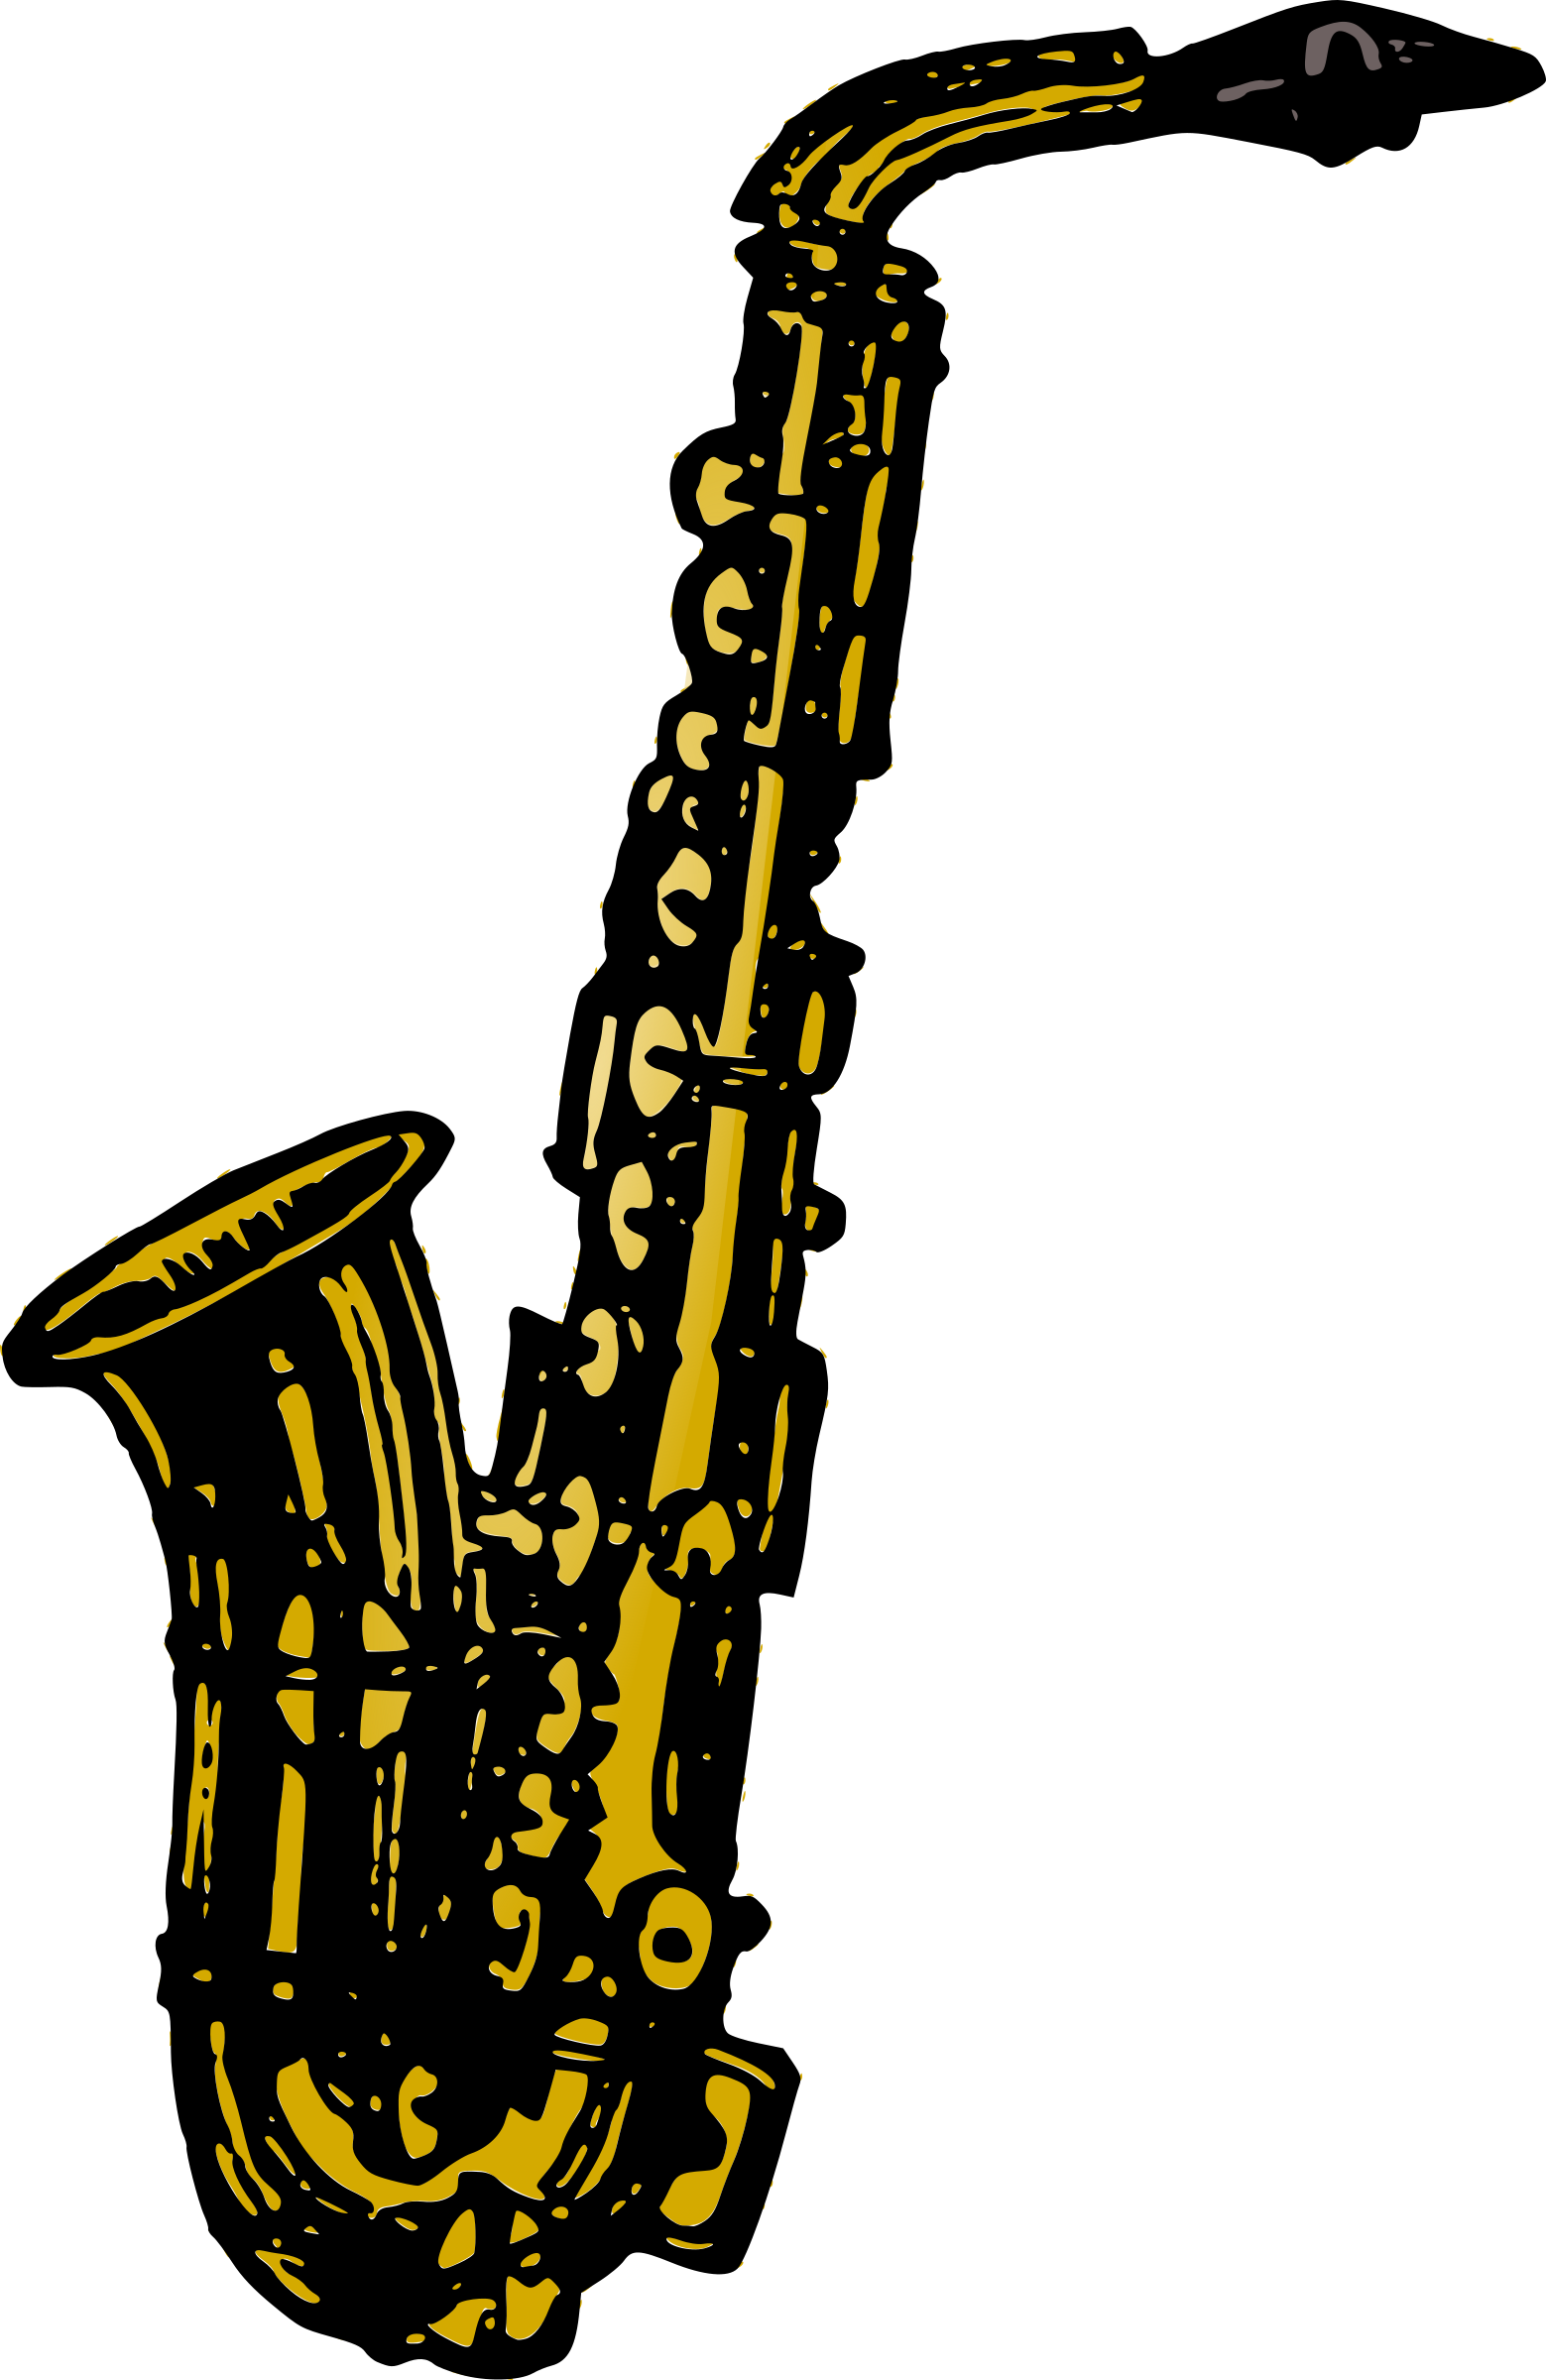 Saxophone free to use clipart